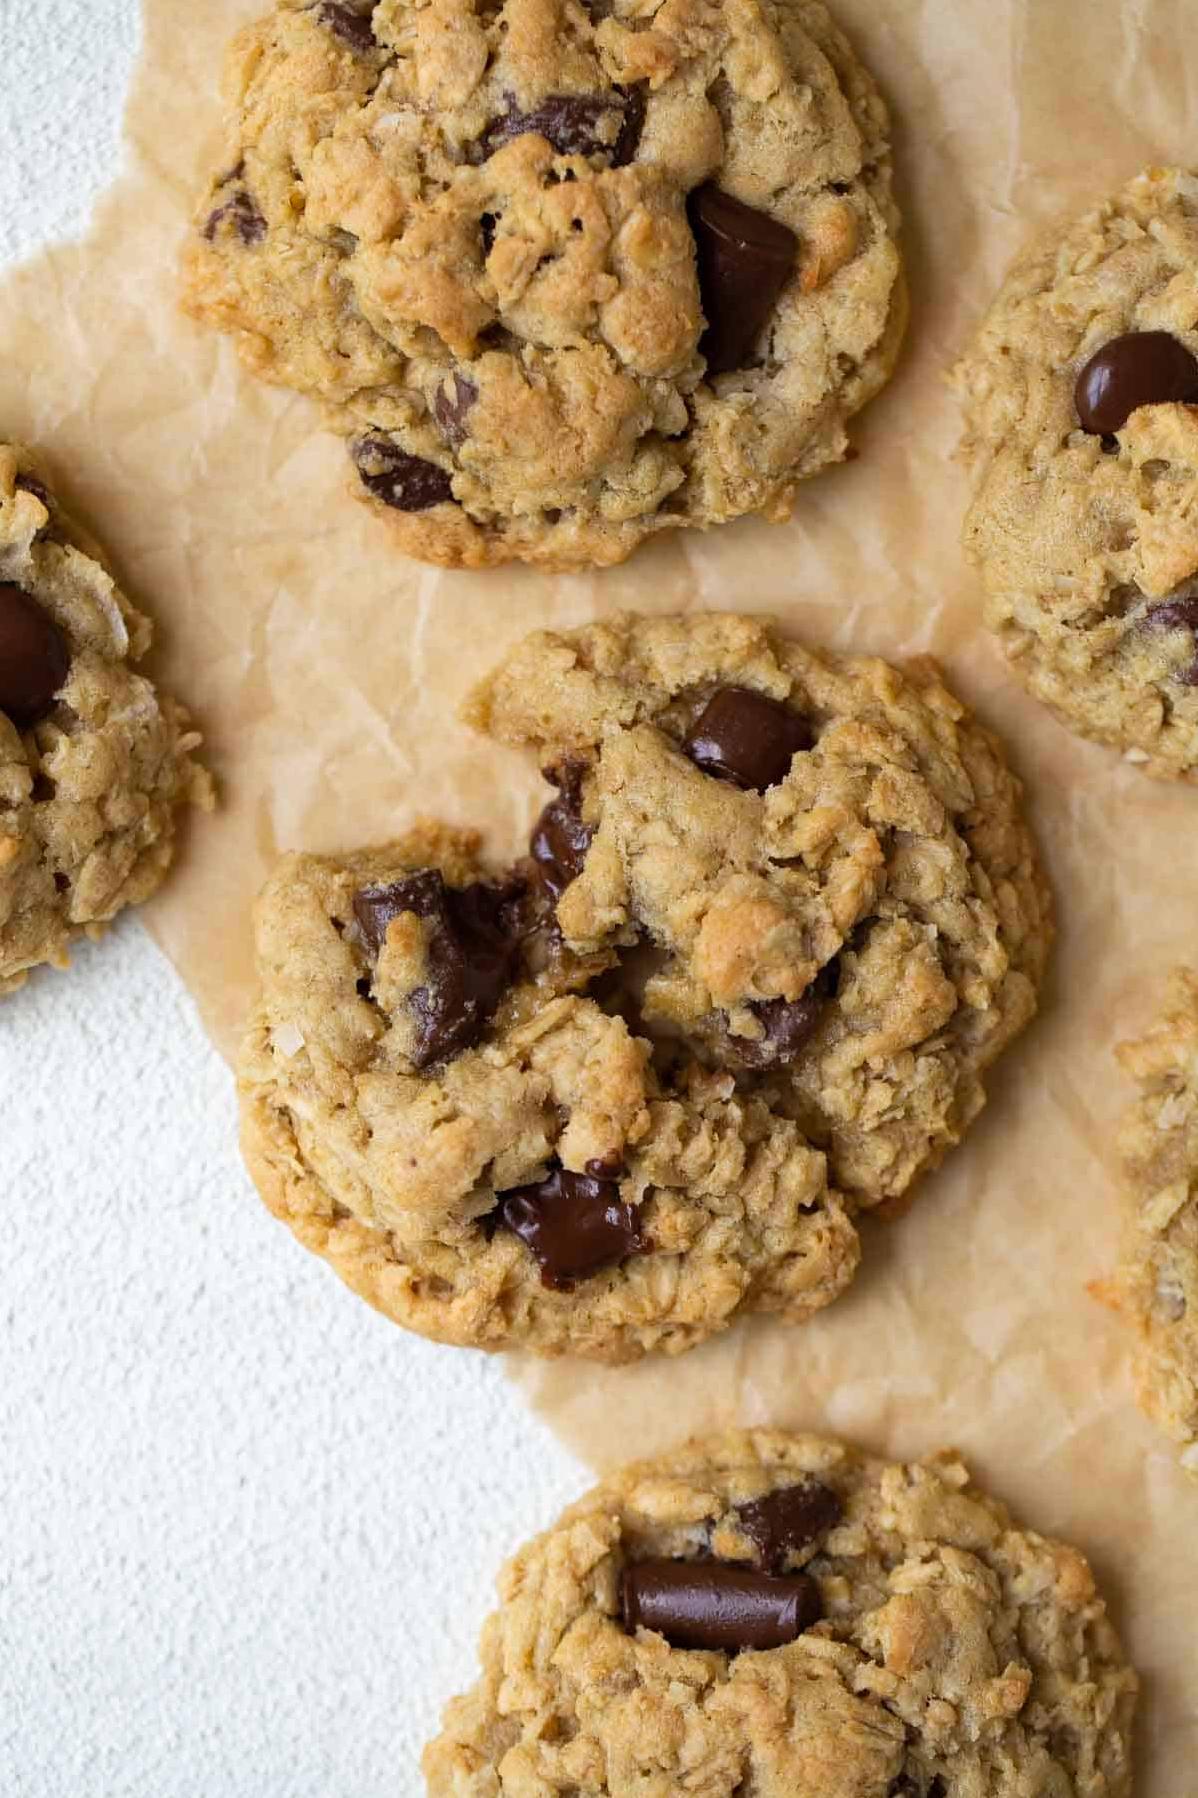  One bite of these cookies and you'll be transported to cookie heaven.